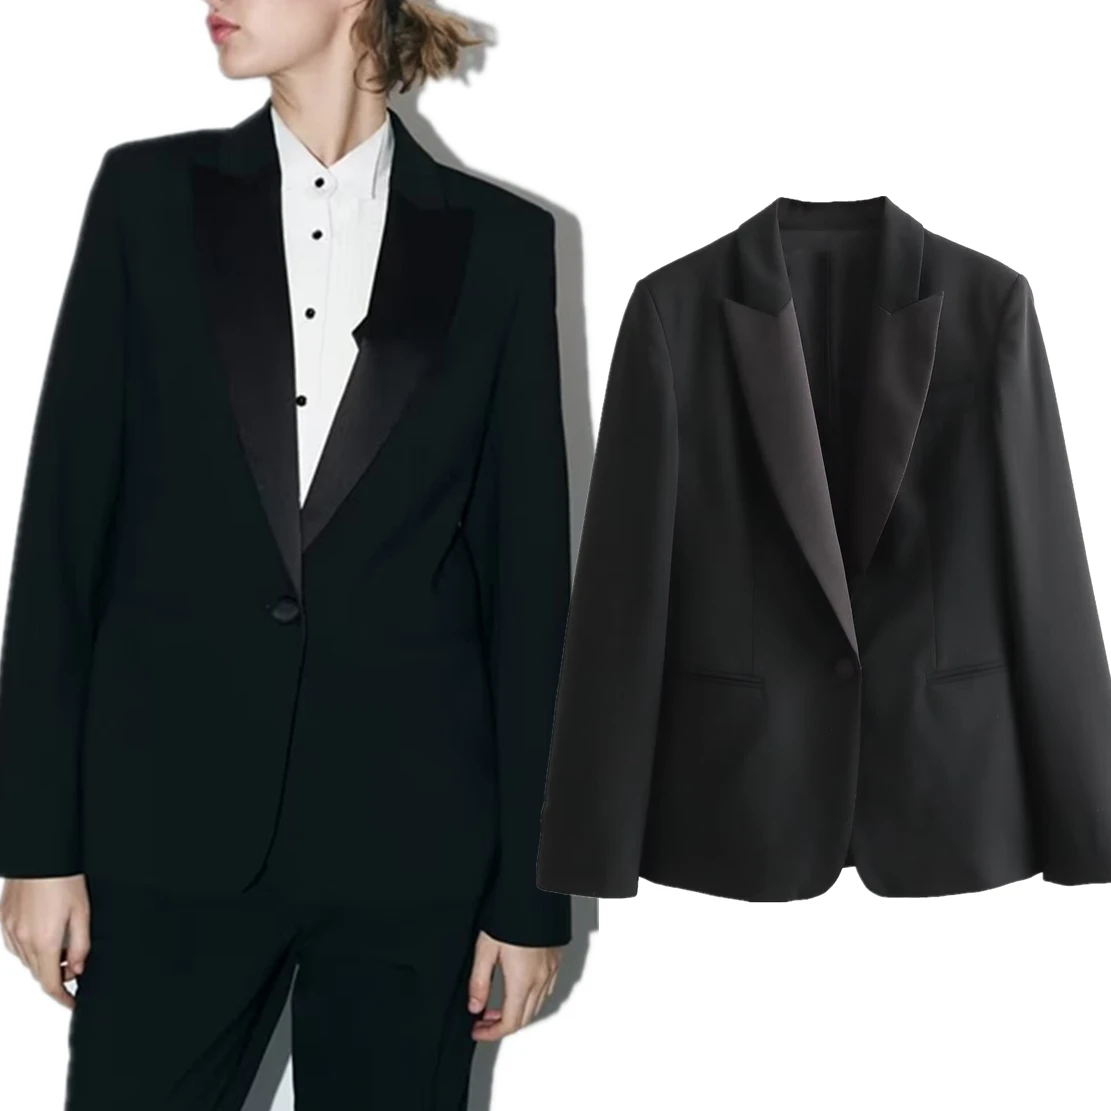 Maxdutti French Style Party Shawl Collar Blazers WOmen Satin Patchwork Casual Black Suits Ladies pink shawl women blazer suits jacket fashion ladies pantsuit costumes womens suits blazer with pants for party groom custom made